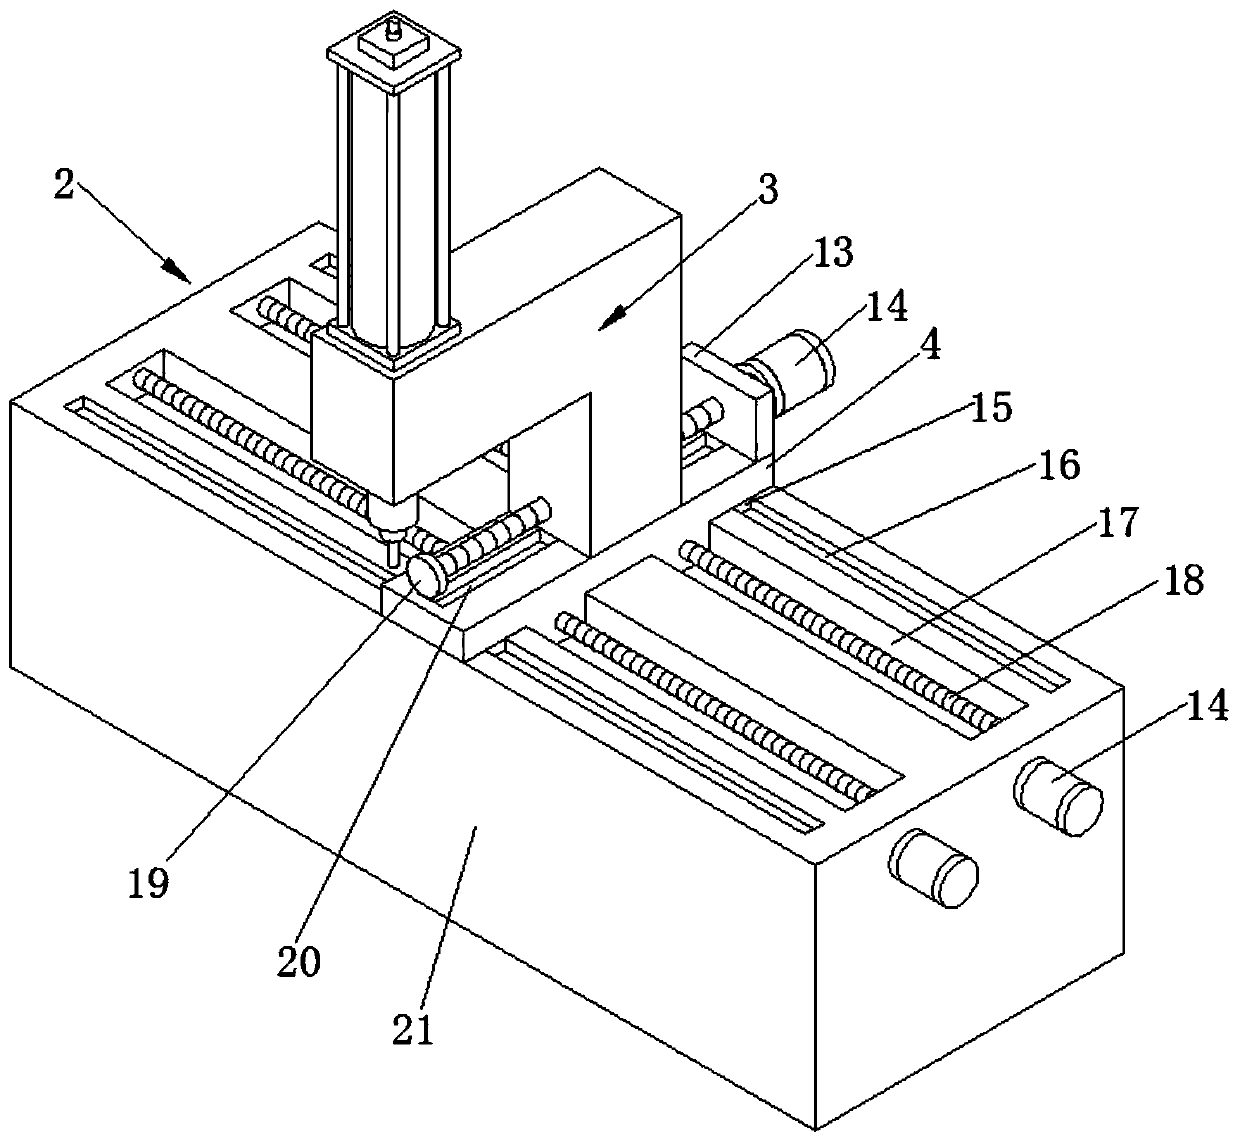 Die-cutting device for tungsten steel knife processing